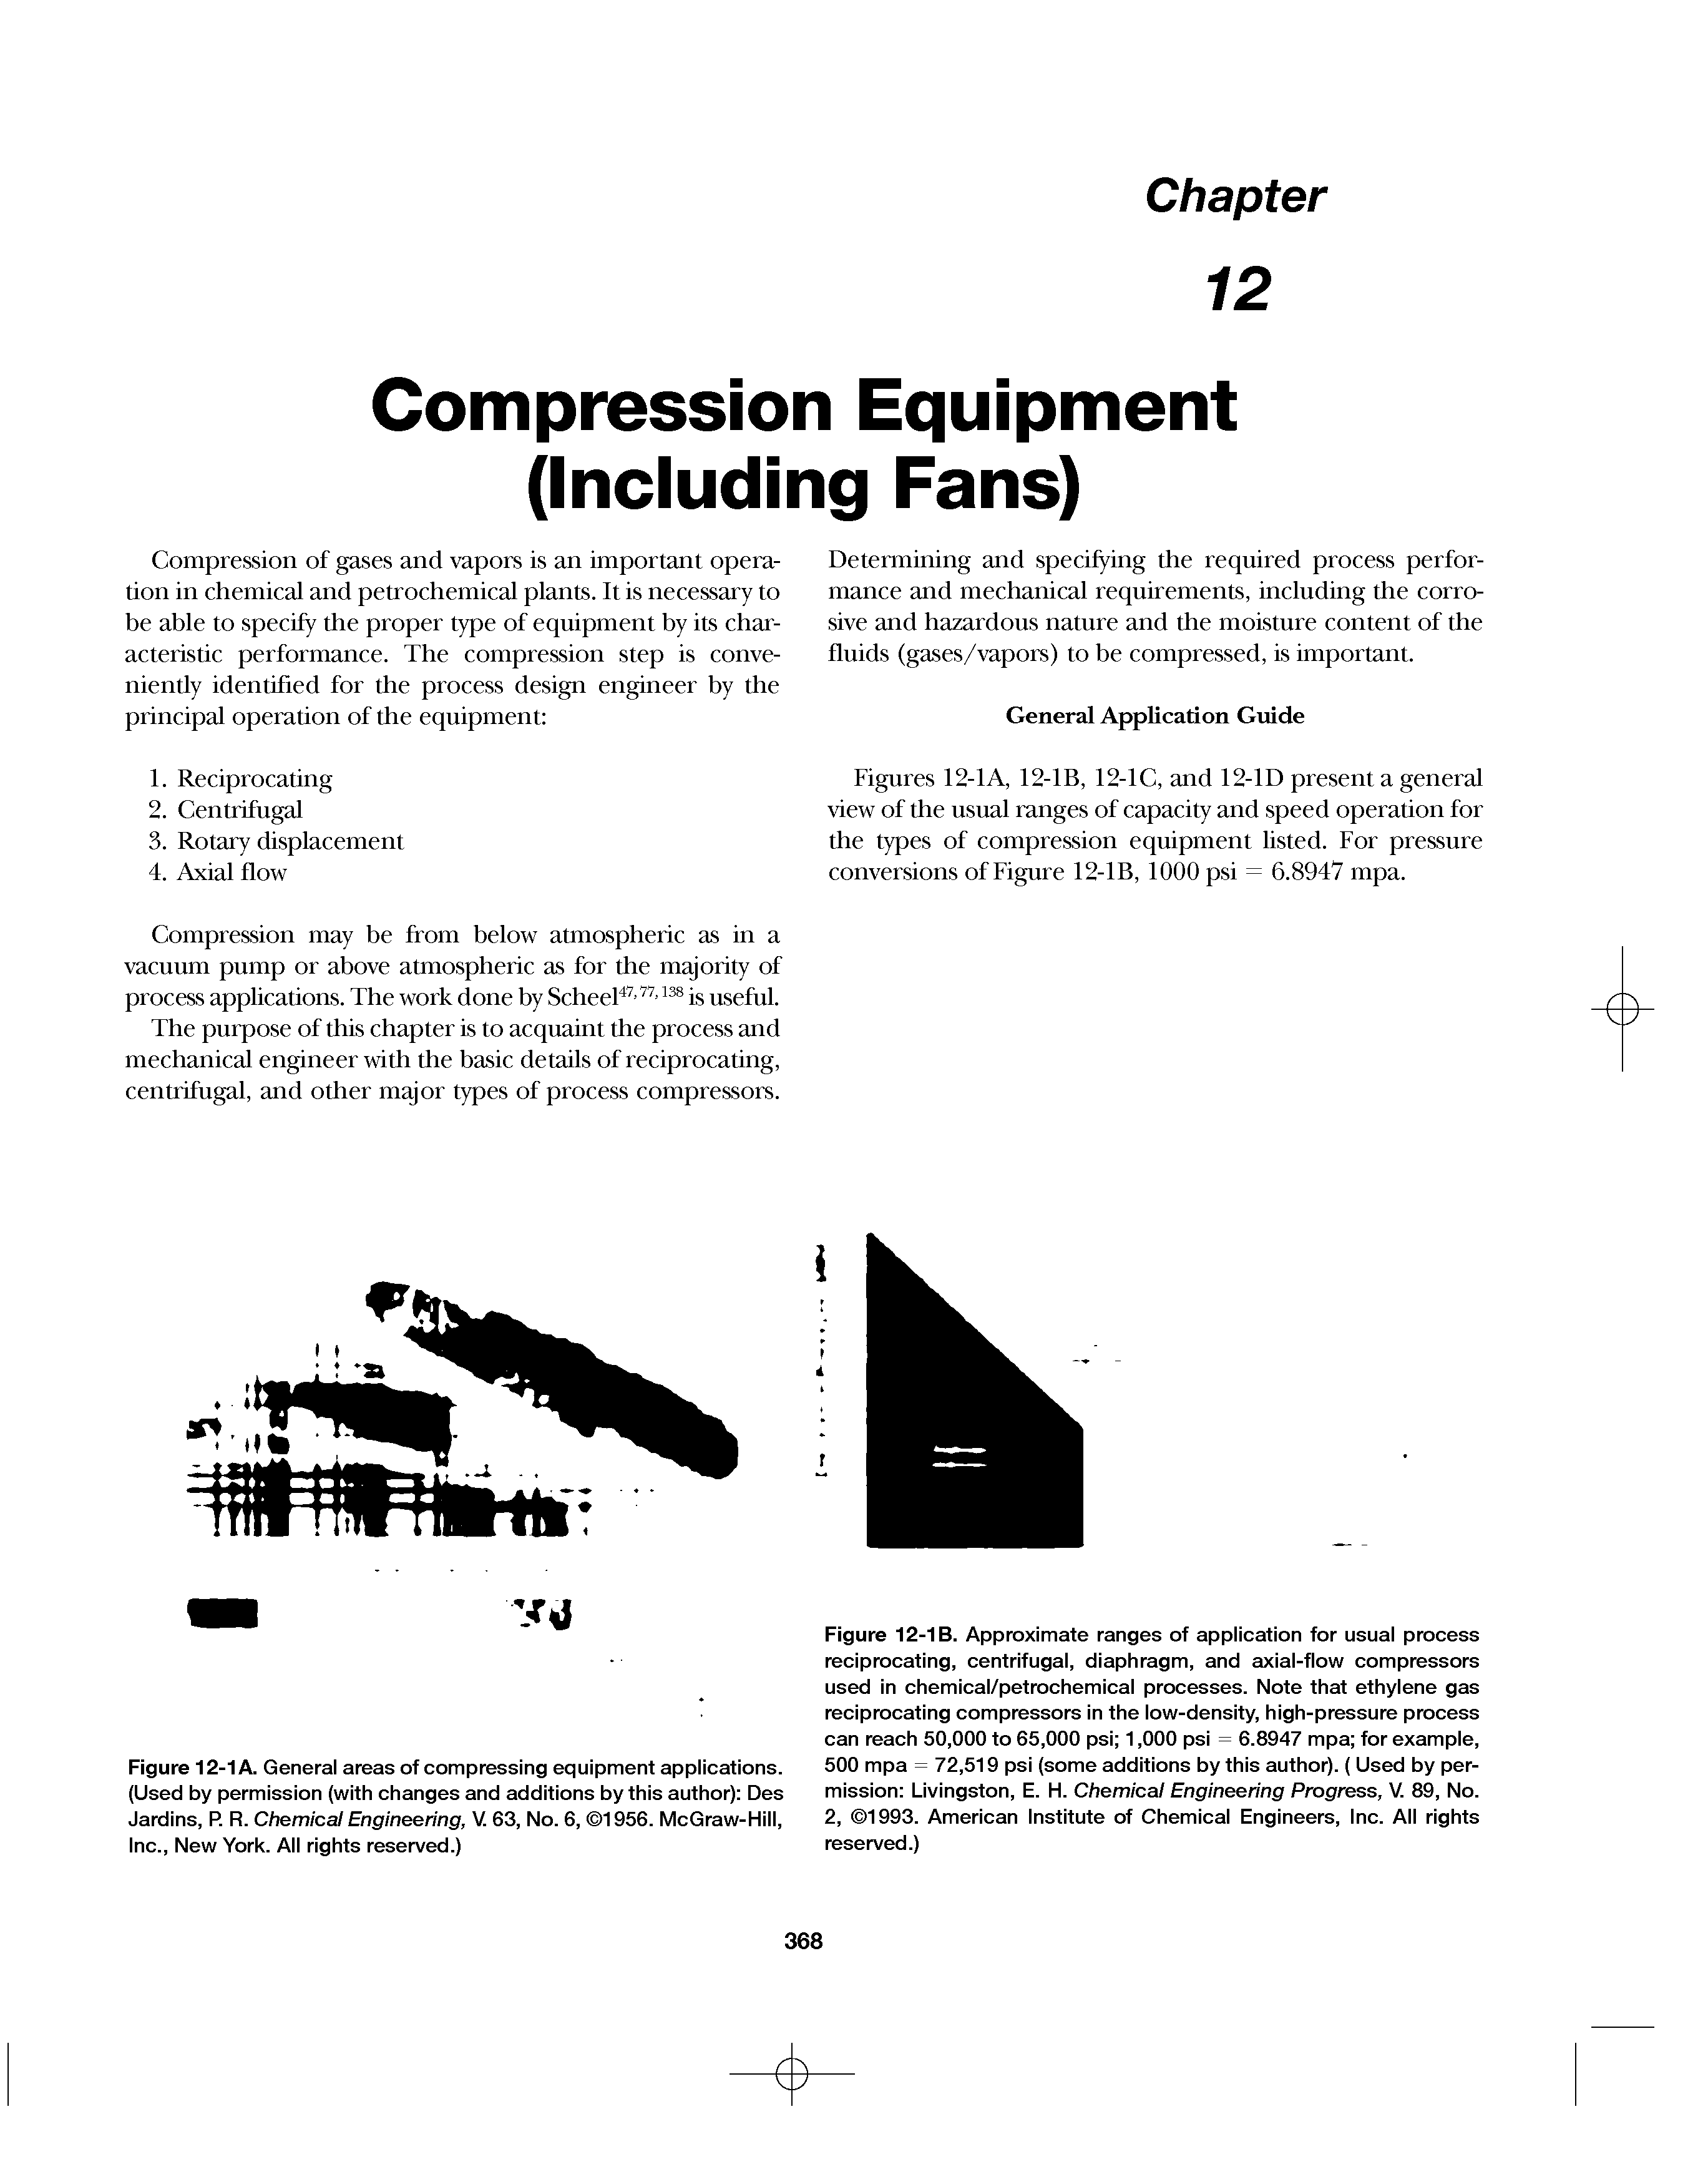 Figures 12-lA, 12-lB, 12-lC, and 12-lD present a general view of the usual ranges of capacity and speed operation for the types of compression equipment listed. For pressure conversions of Figure 12-lB, 1000 psi = 6.8947 mpa.